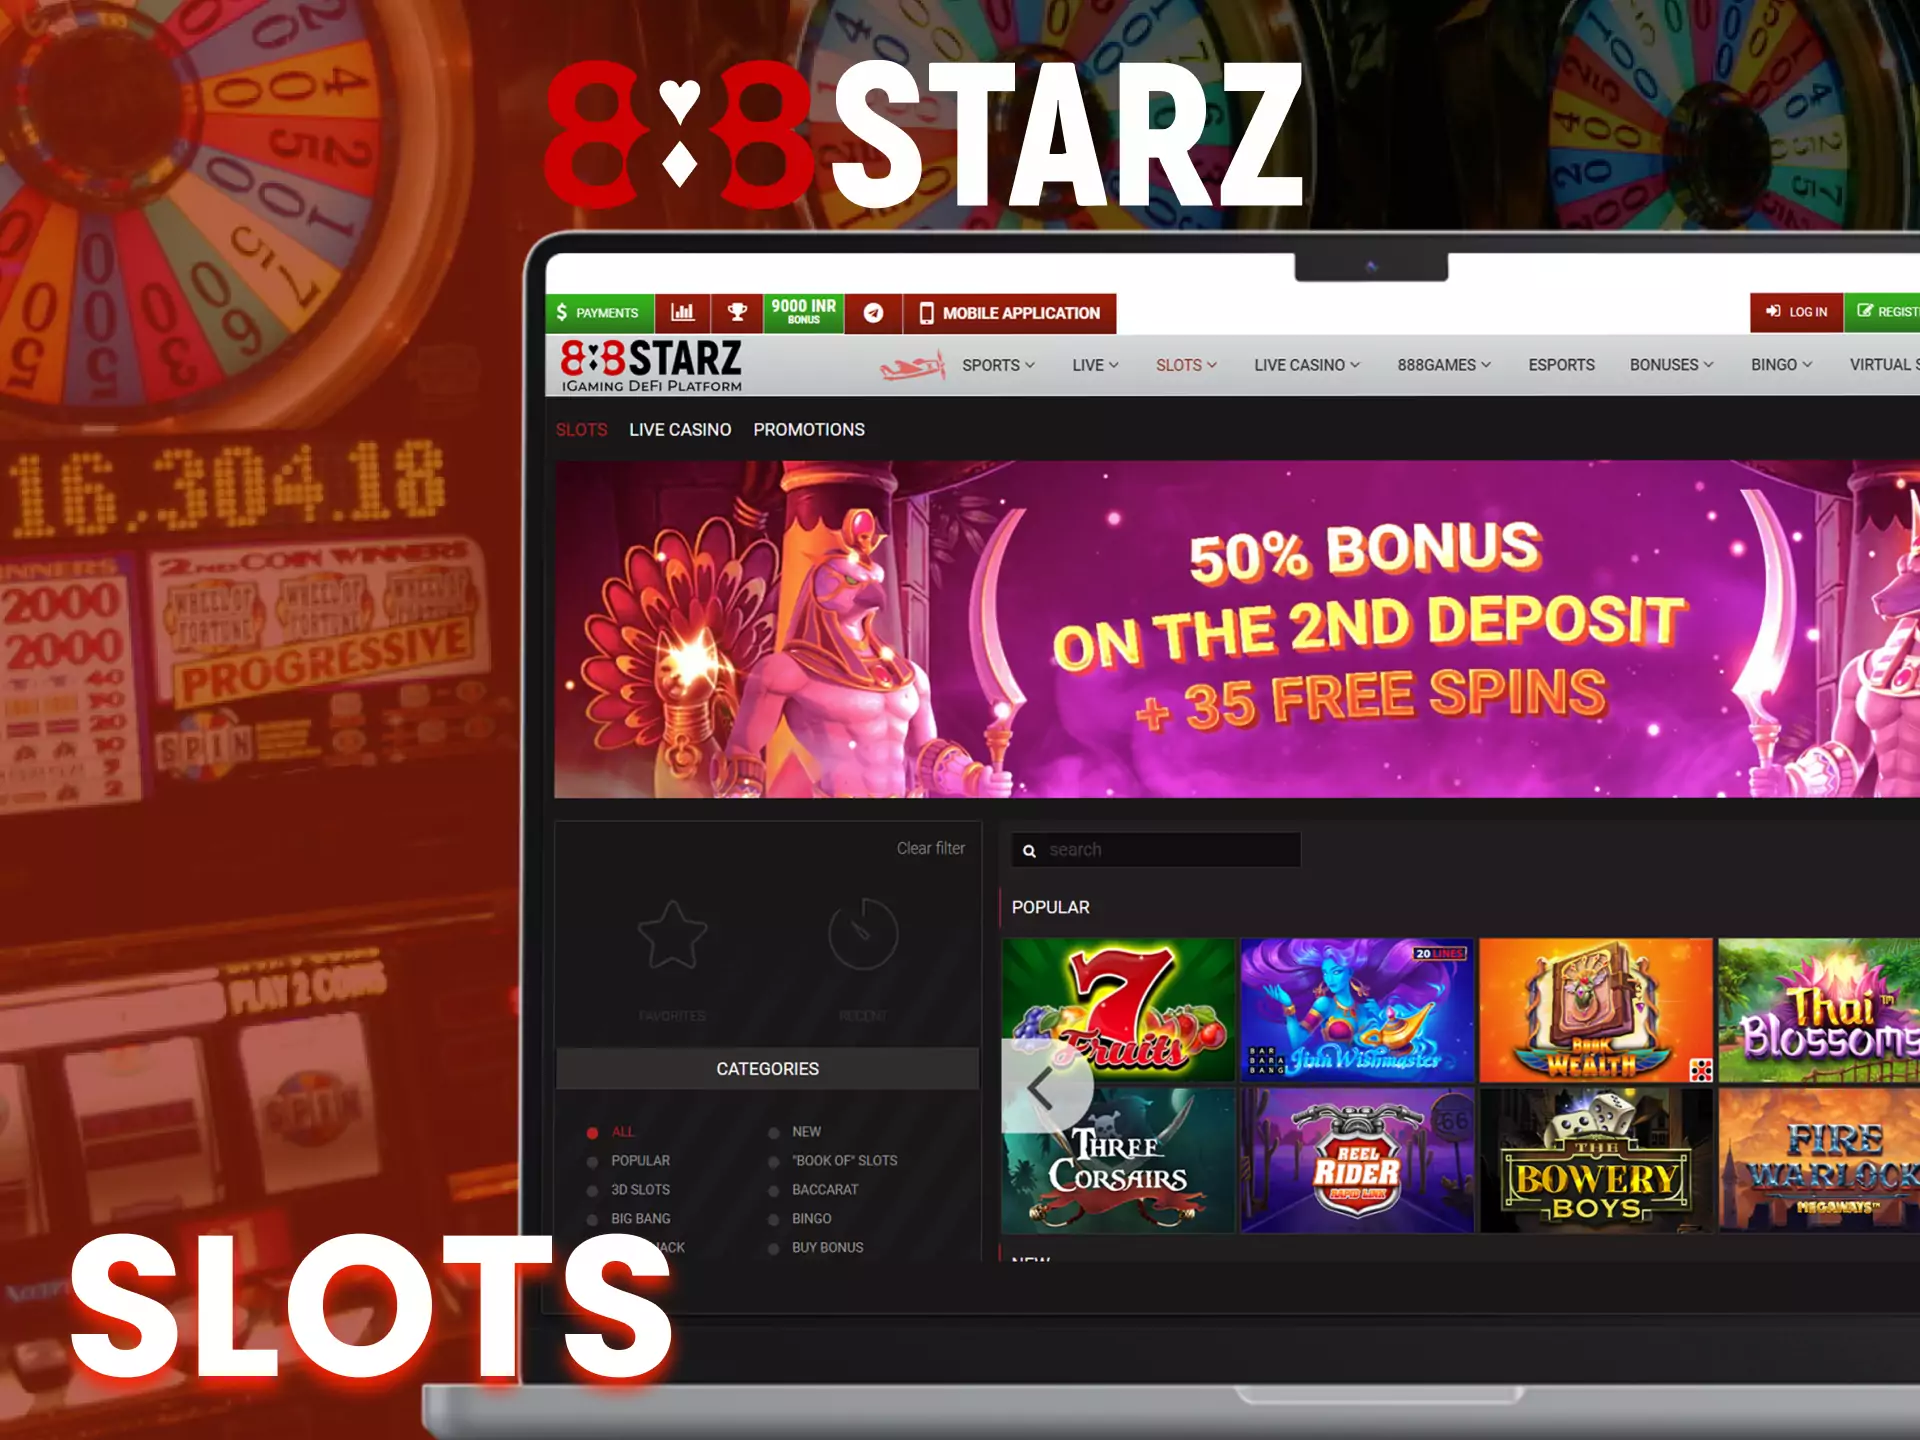 Spin your favourite slots at 888starz.